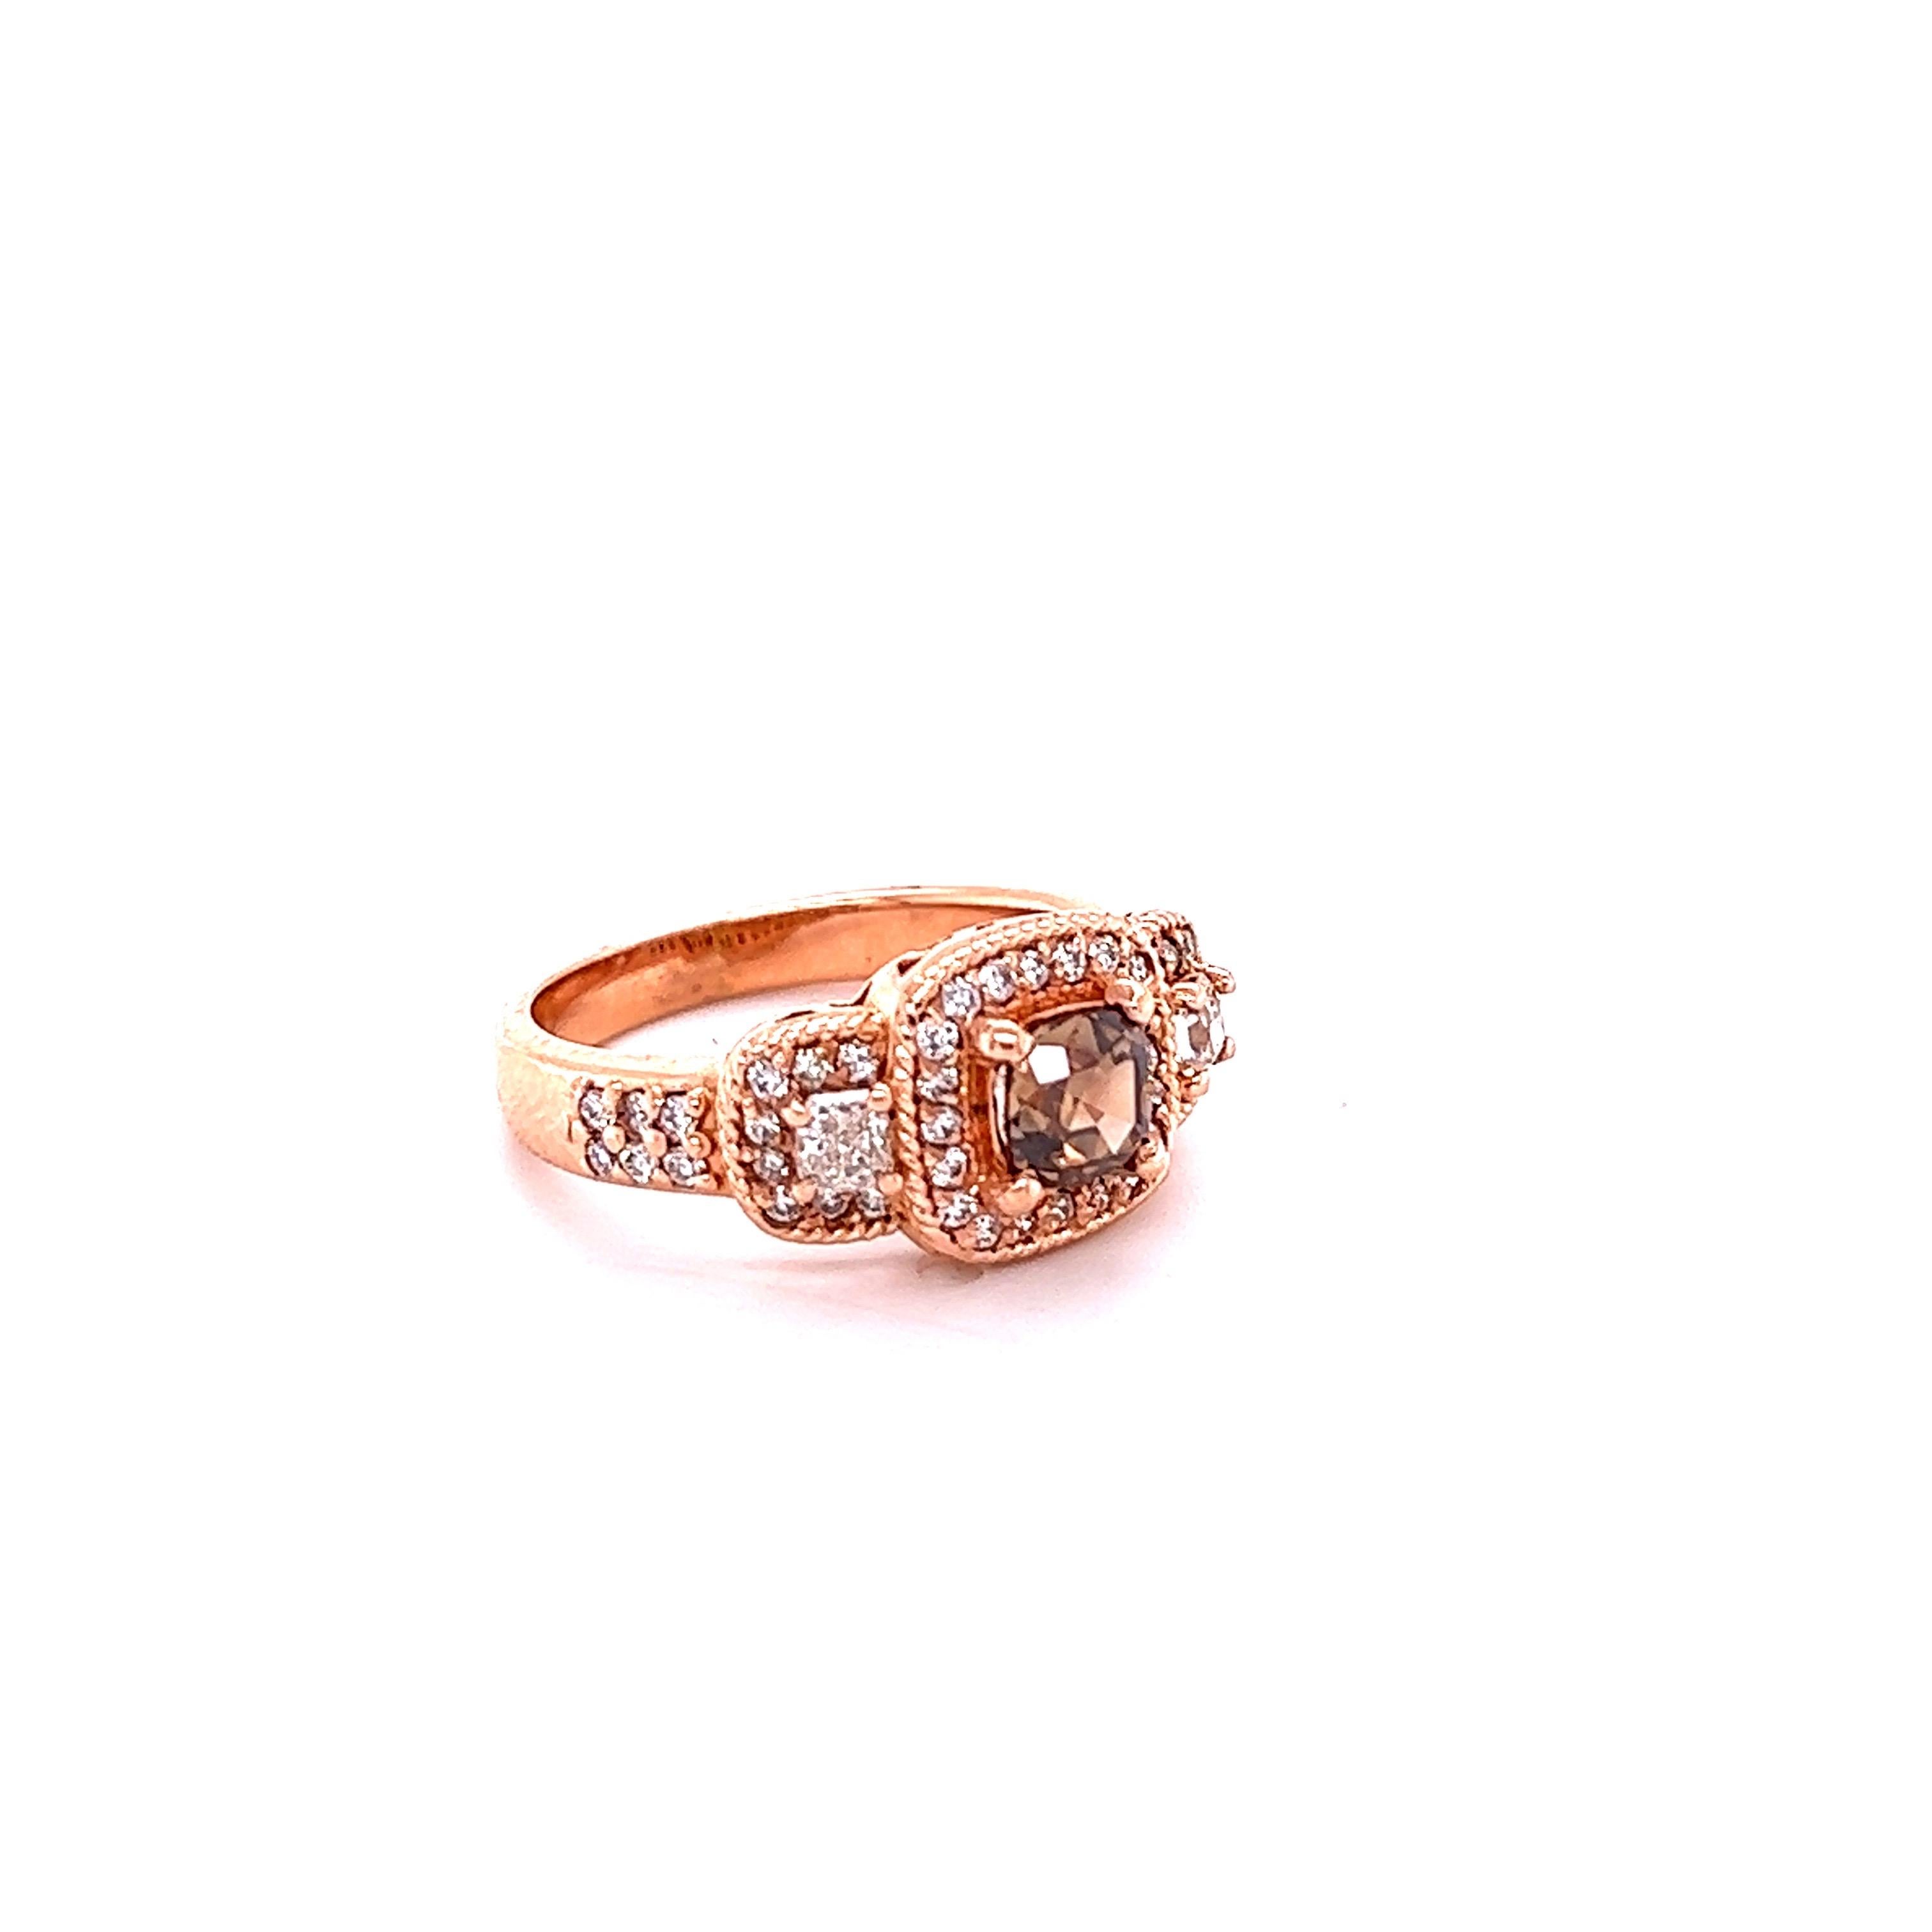 This Cushion Cut Natural Brown Diamond weighs 0.83 Carats and has 50 Natural White Diamonds on the sides that weigh 0.76 carats. The Clarity and Color of the Diamonds are VS-F. The total carat weight of the ring is 1.59 Carats. 

Crafted in 14 Karat